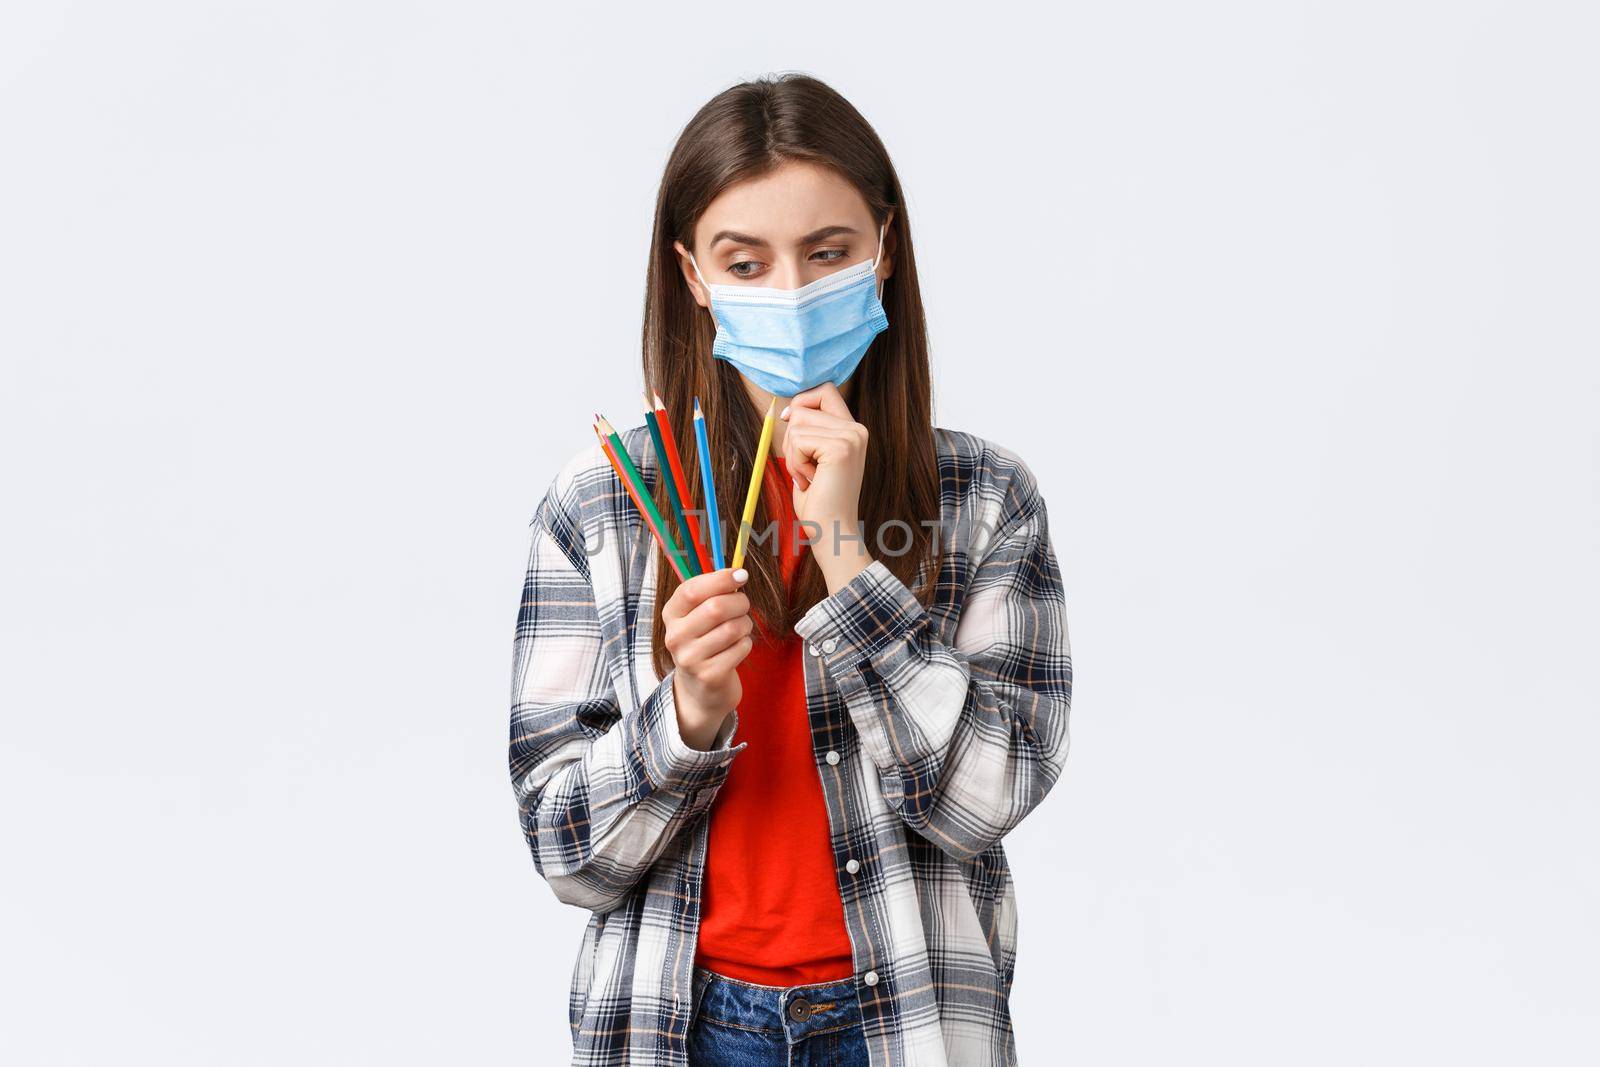 Social distancing, leisure, hobbies on covid-19 outbreak, coronavirus concept. Thoughtful cute girl in medical mask learn how draw on self-quarantine, wear medical mask, thinking as look at pencils.